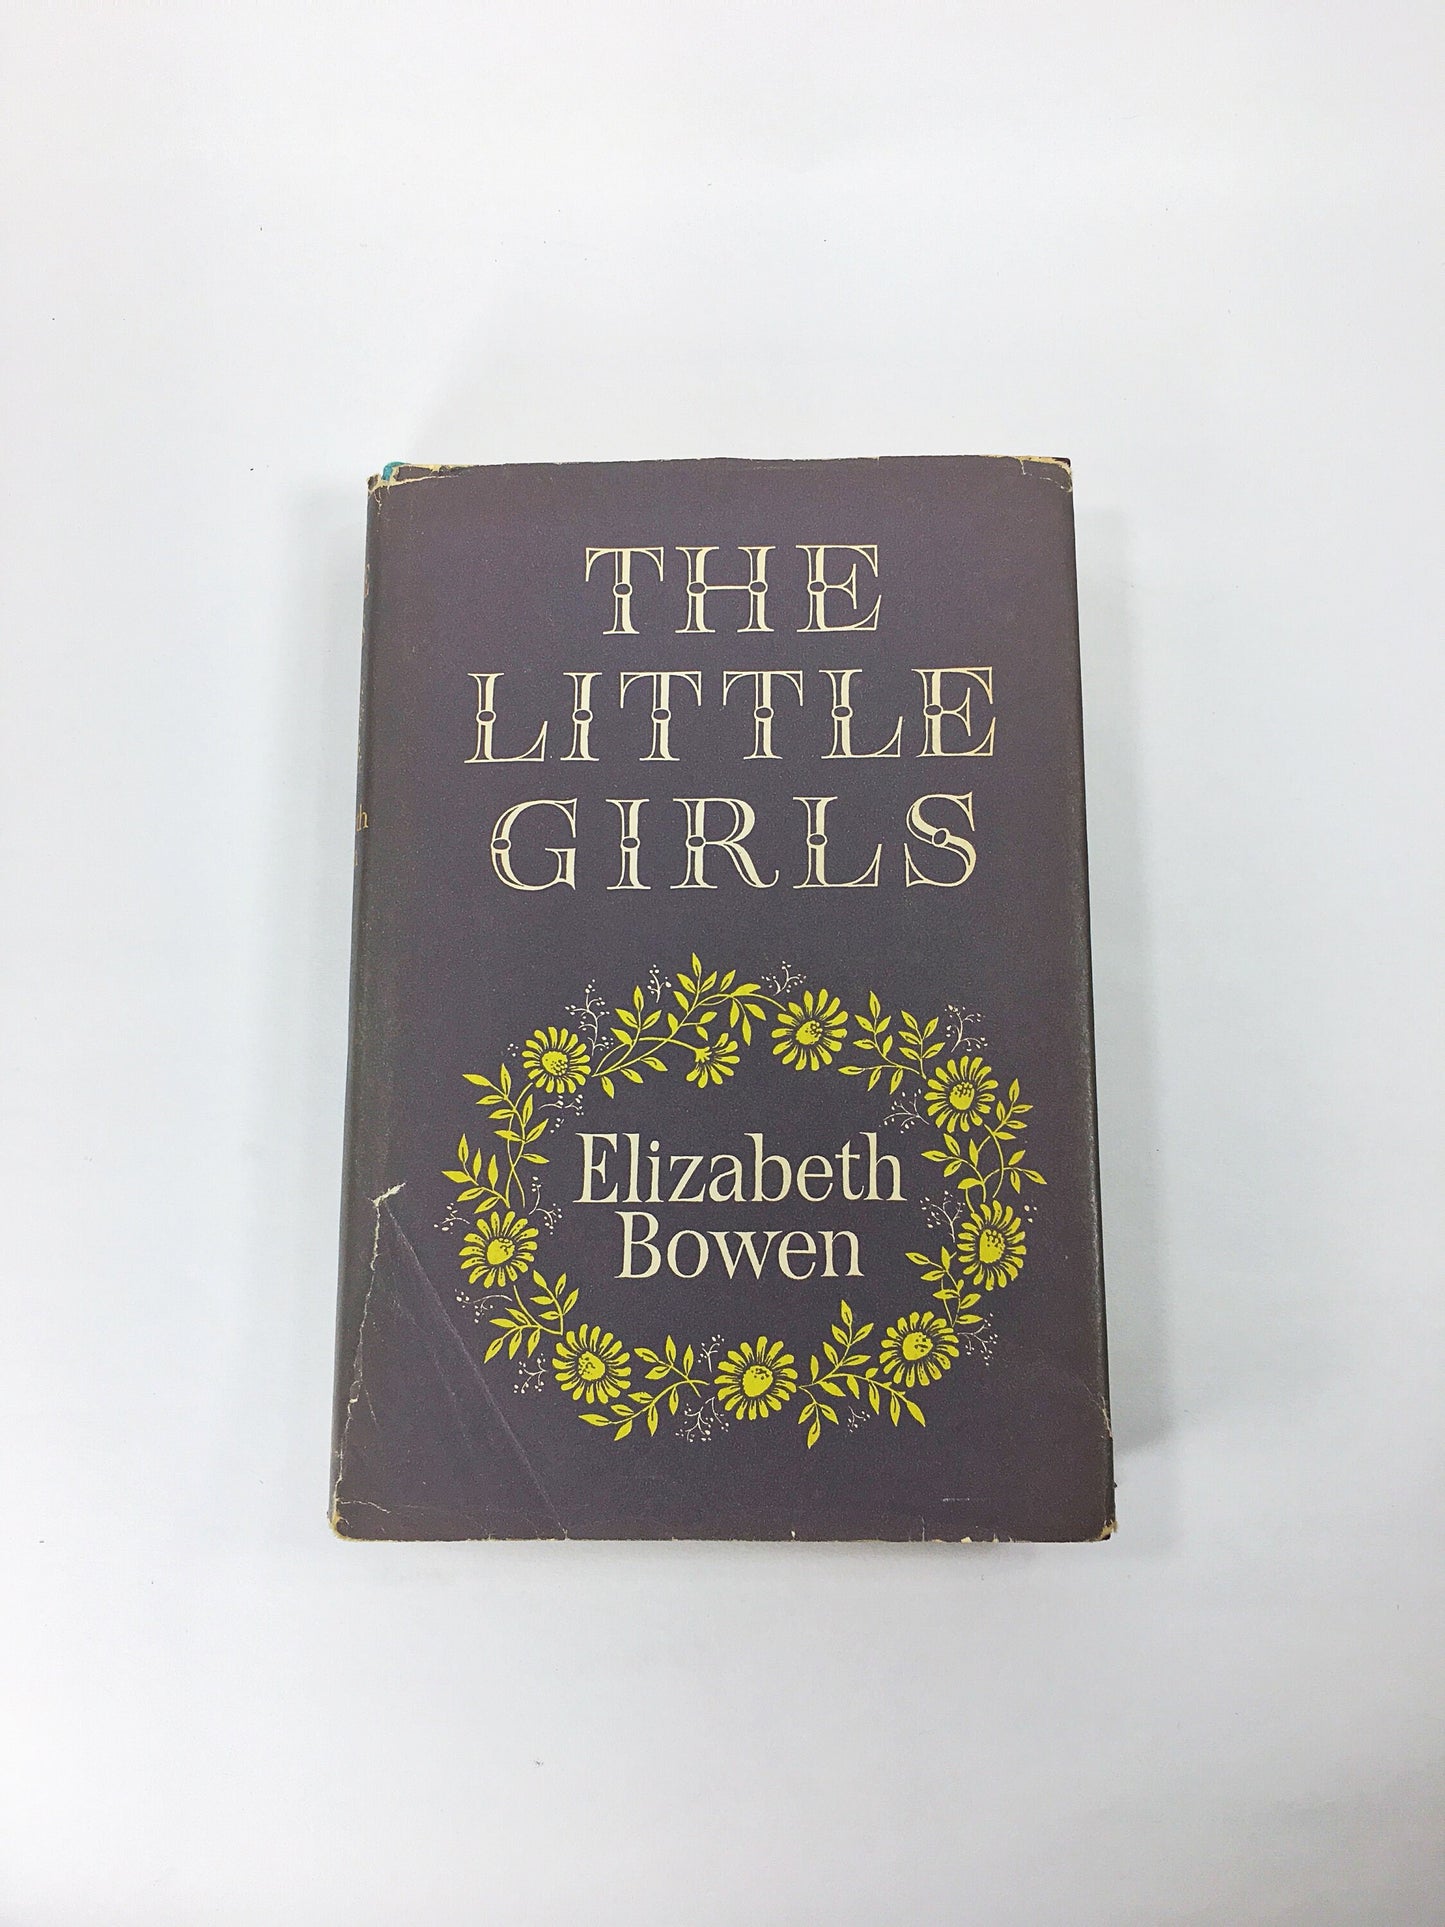 1966 Three British women and the story of their friendship Little Girls by Elizabeth Bowen. Vintage book WWI